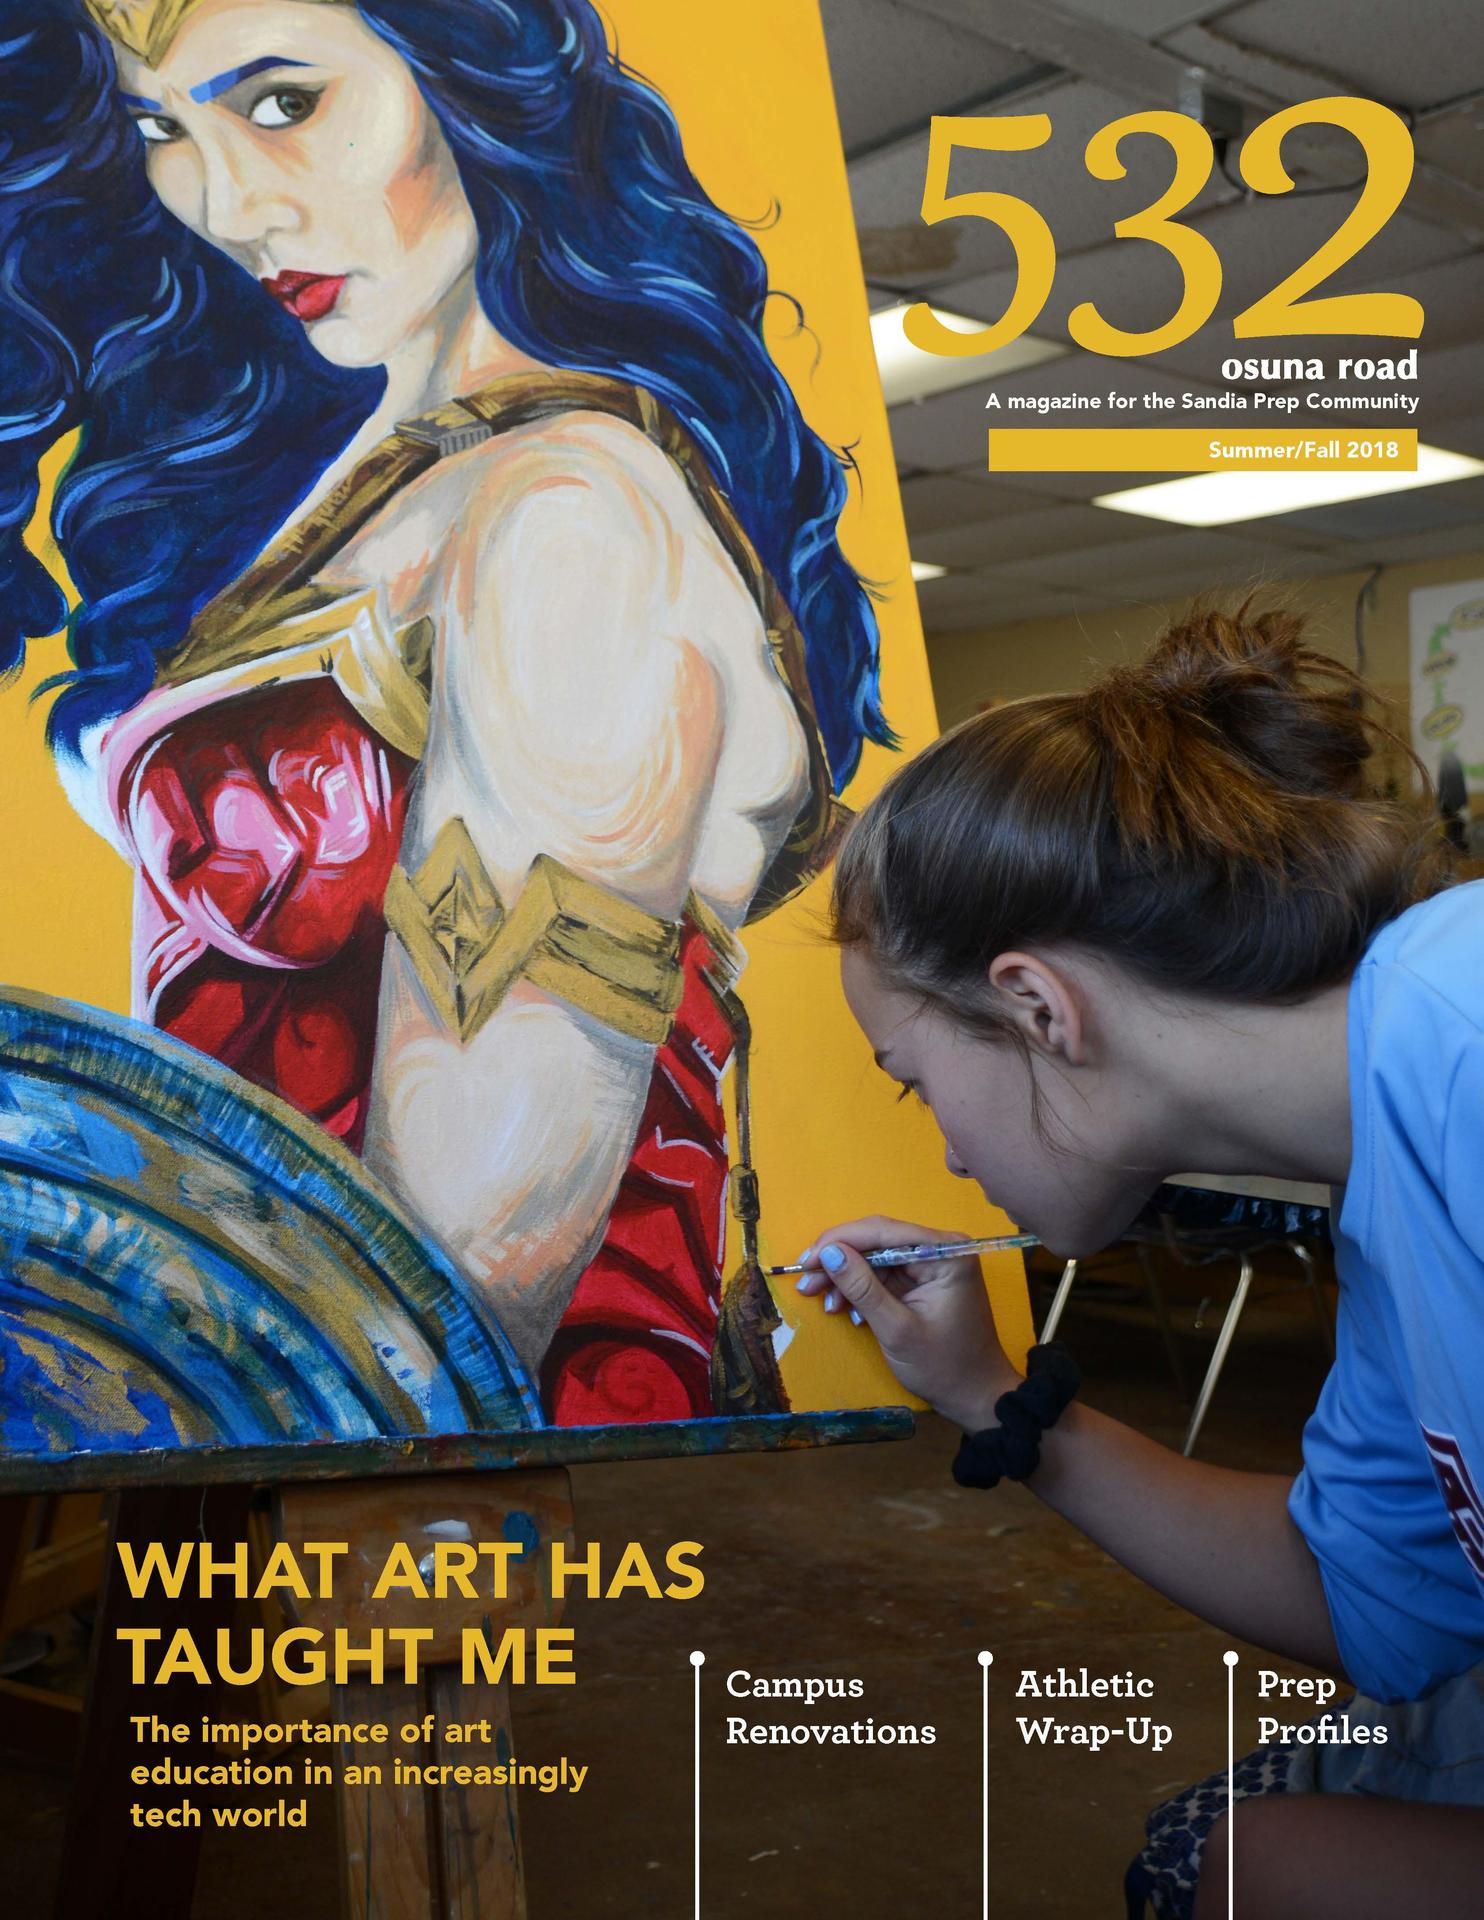 532 magazine cover of student painting portrait